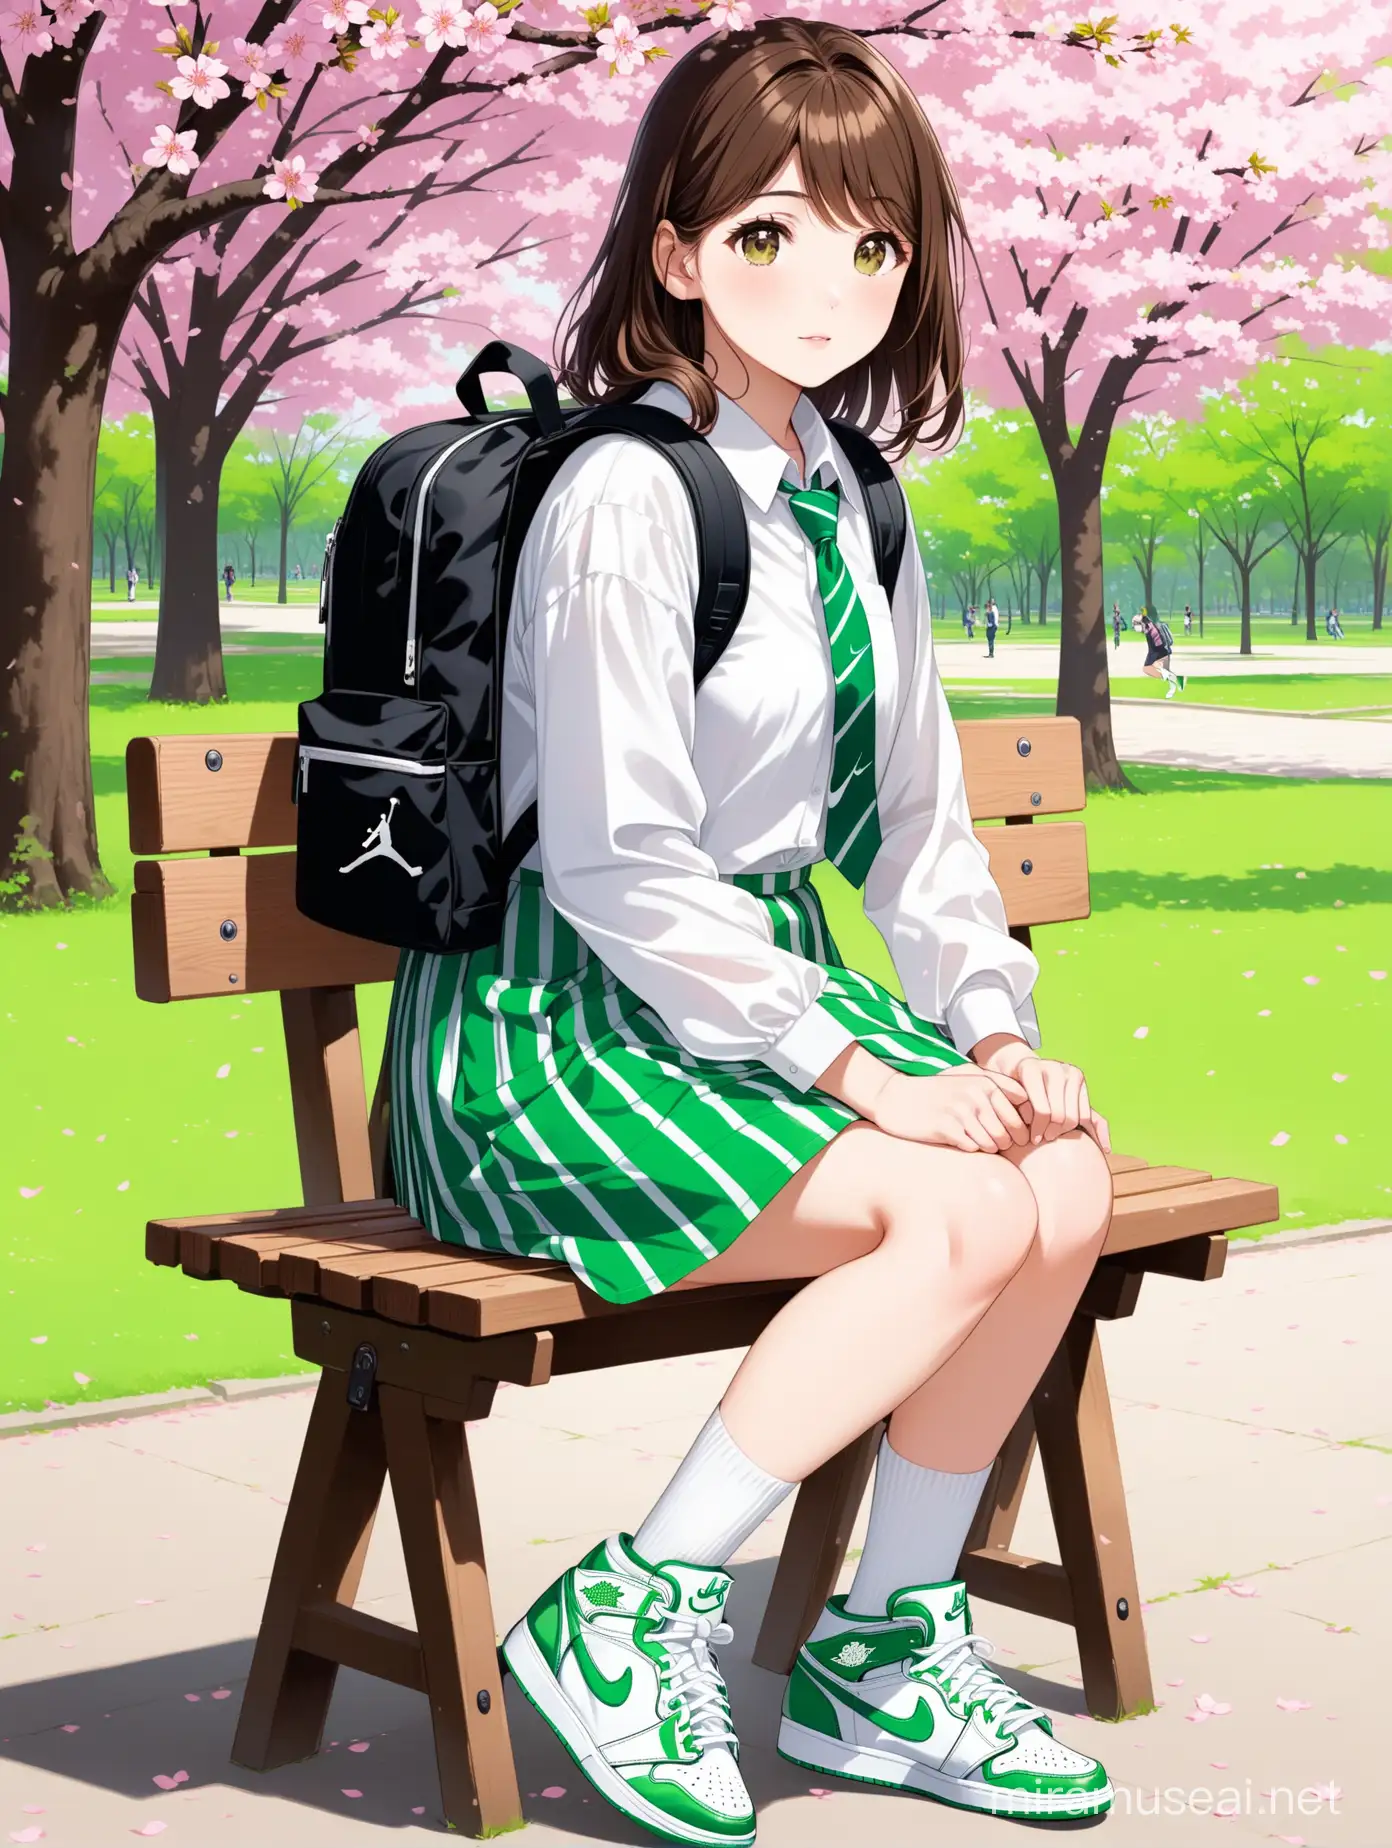 Young Woman Sitting in Park with Sakura Trees